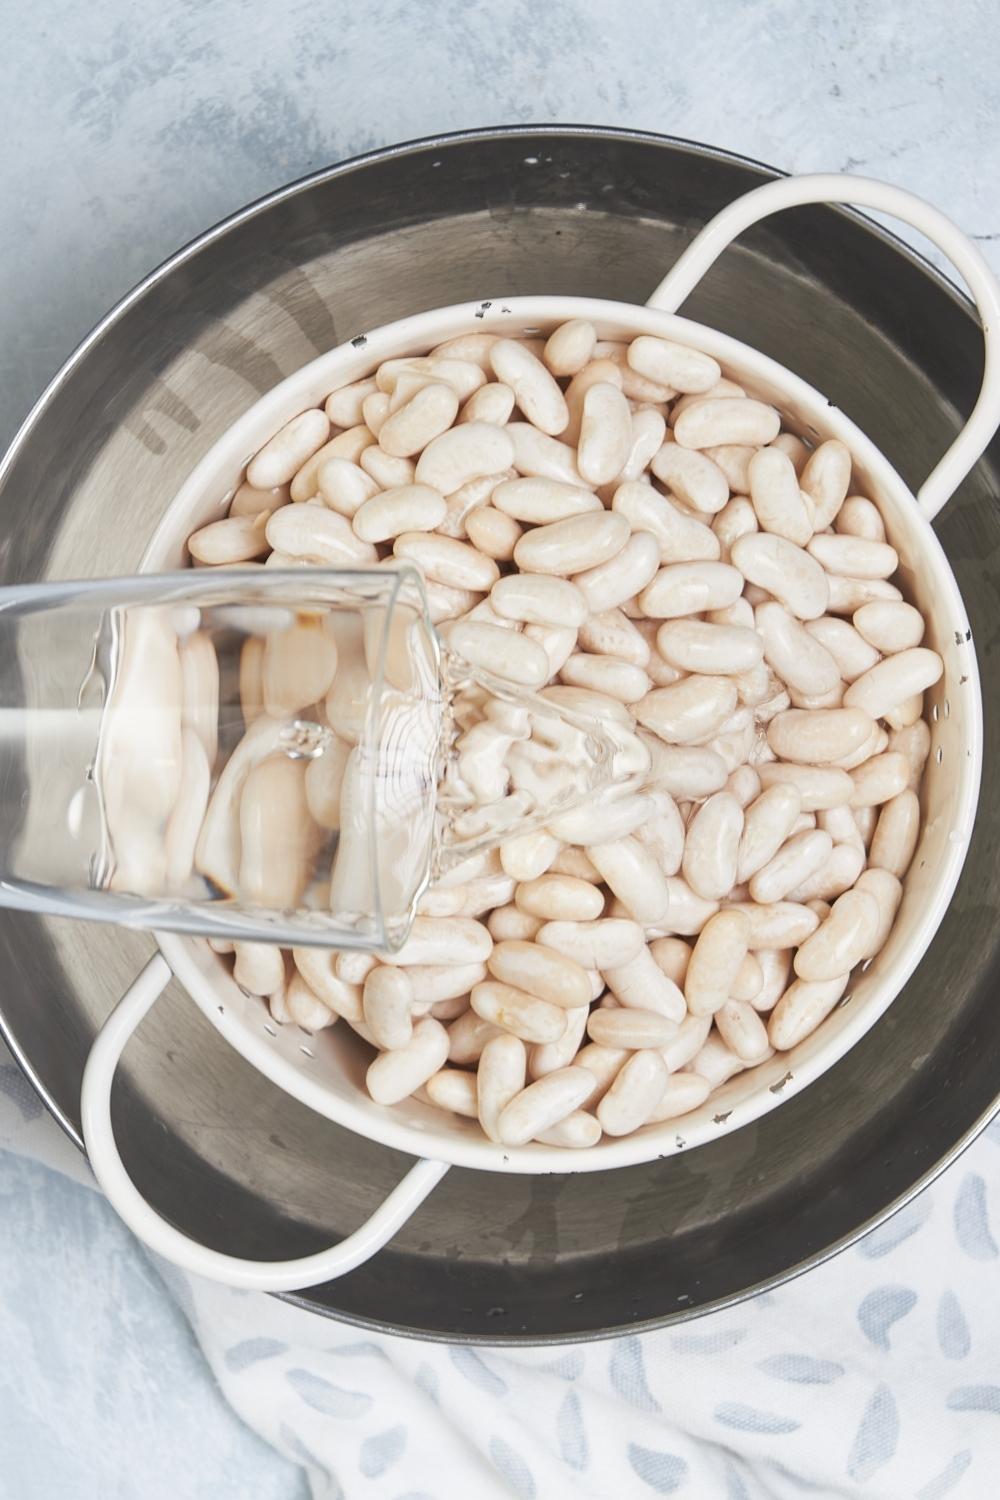 A bowl with a strainer full of dry great northern beans. A pitcher of water is filling the bowl to soak the beans overnight.